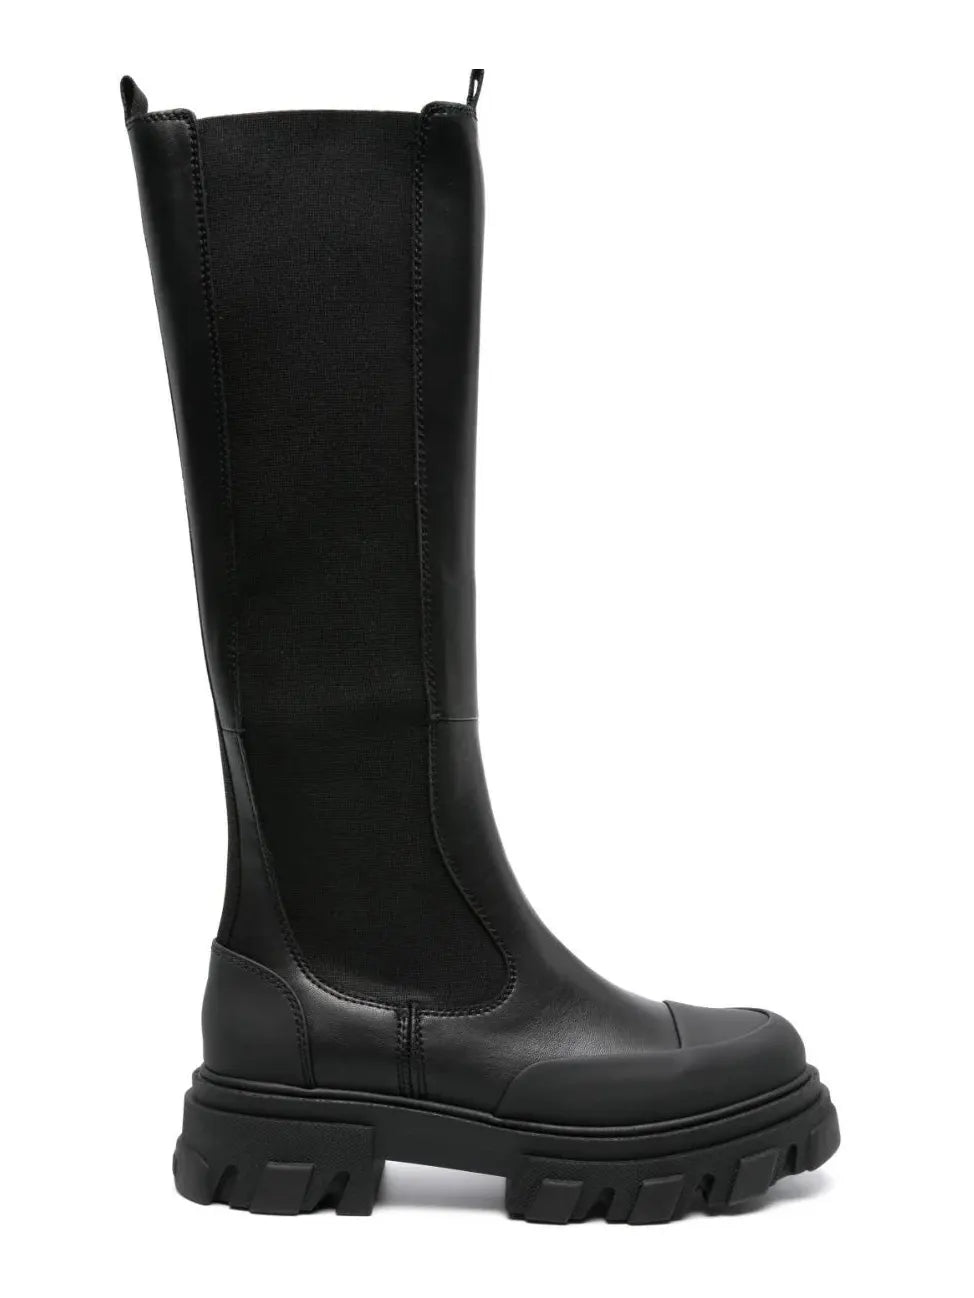 Cleated High Chelsea Boot Black Stitch, black